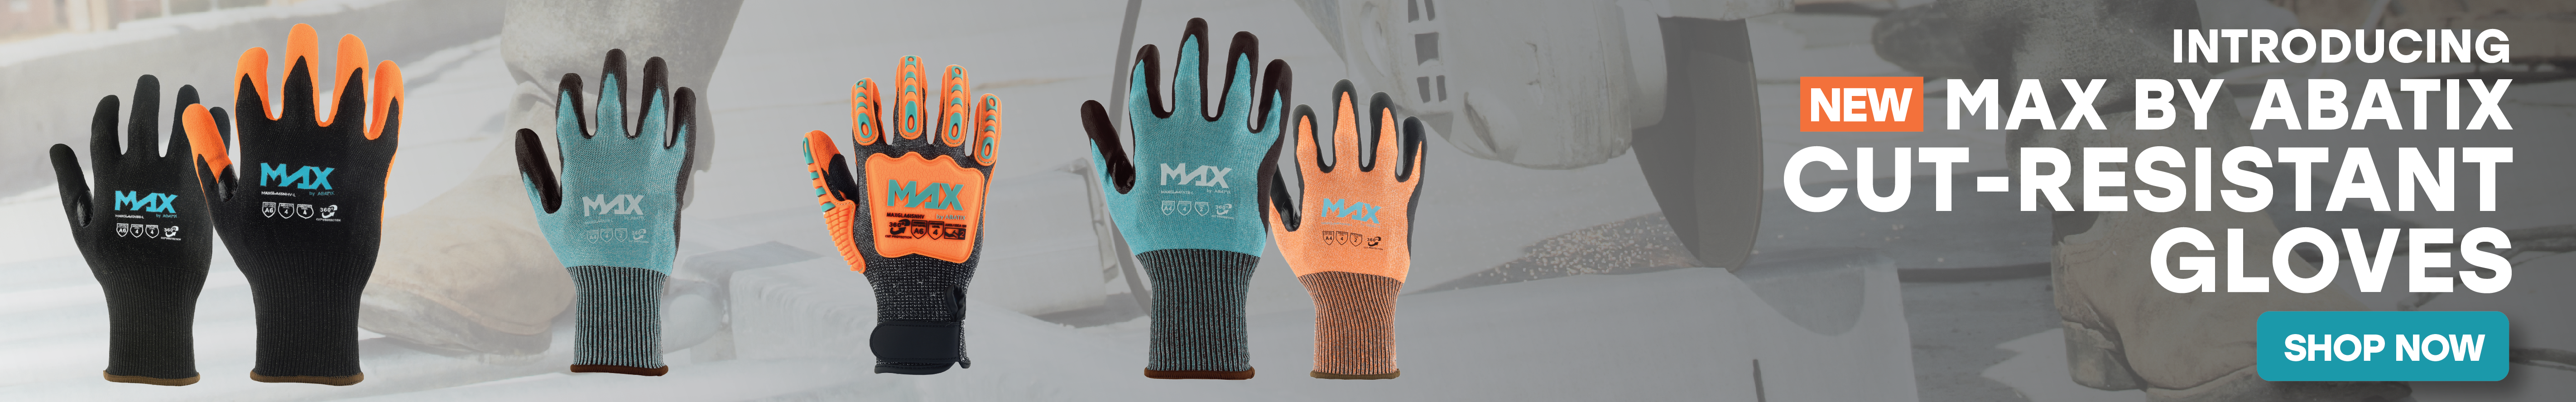 MAX By ABATIX Gloves